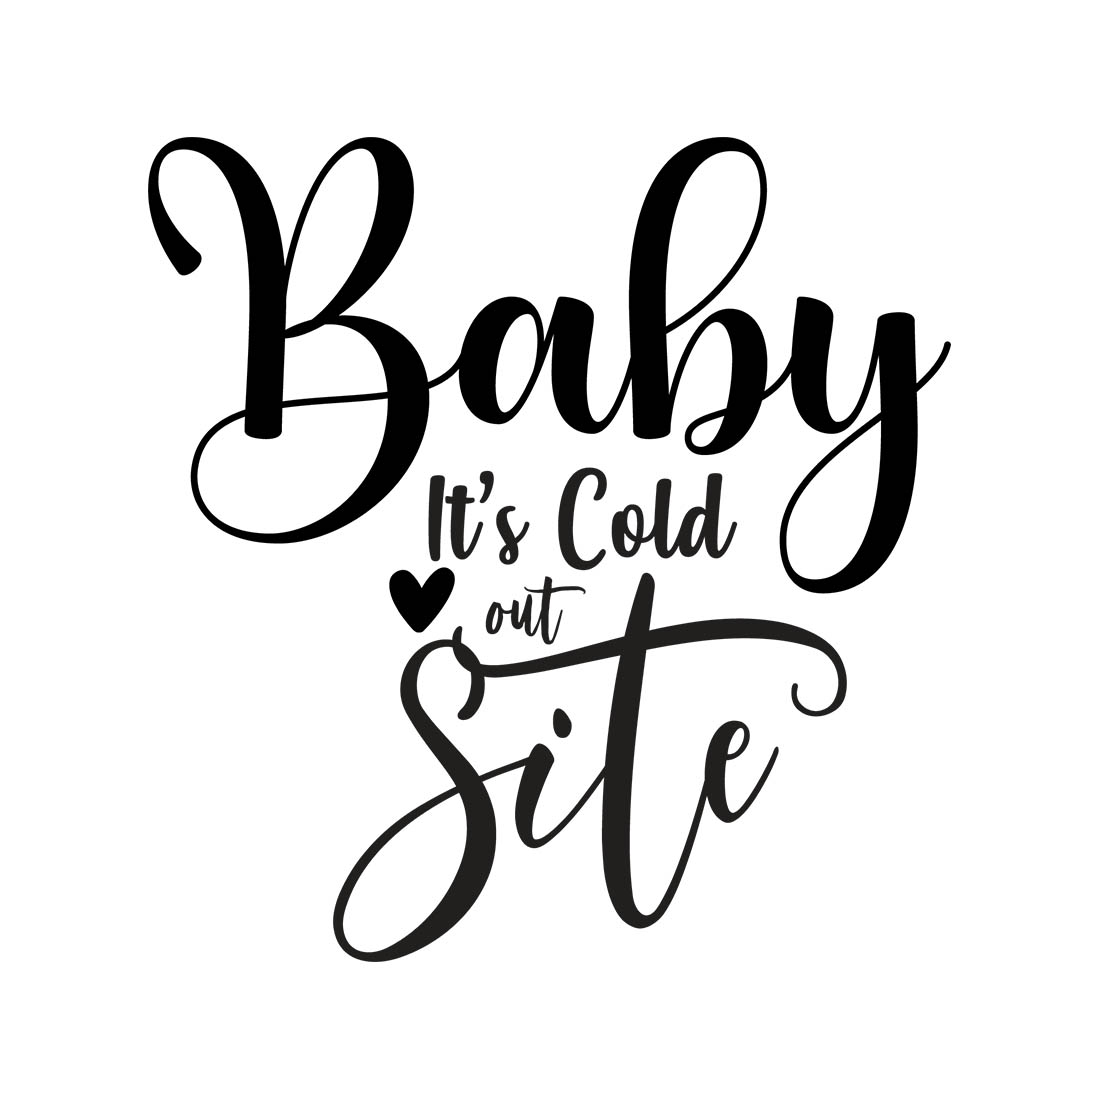 Image with adorable black lettering for Baby It's Cold out Side prints.